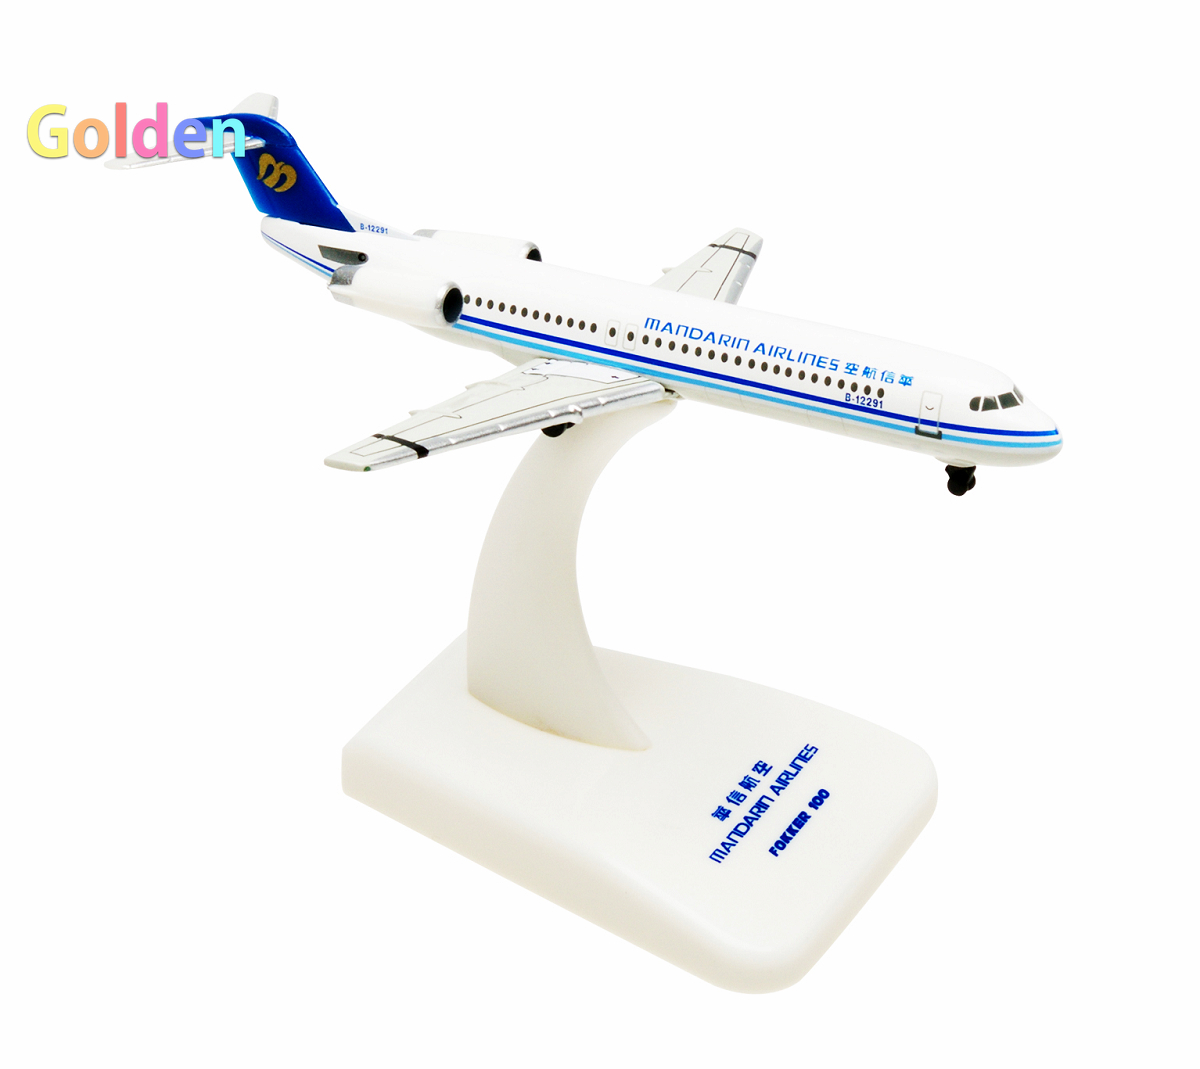 Hogan 1:500 Fokker 100 B-12291 HG9611 Boy Toy Gift Collection Aircraft Model Collection Set Alloy Airplane Model Static Display